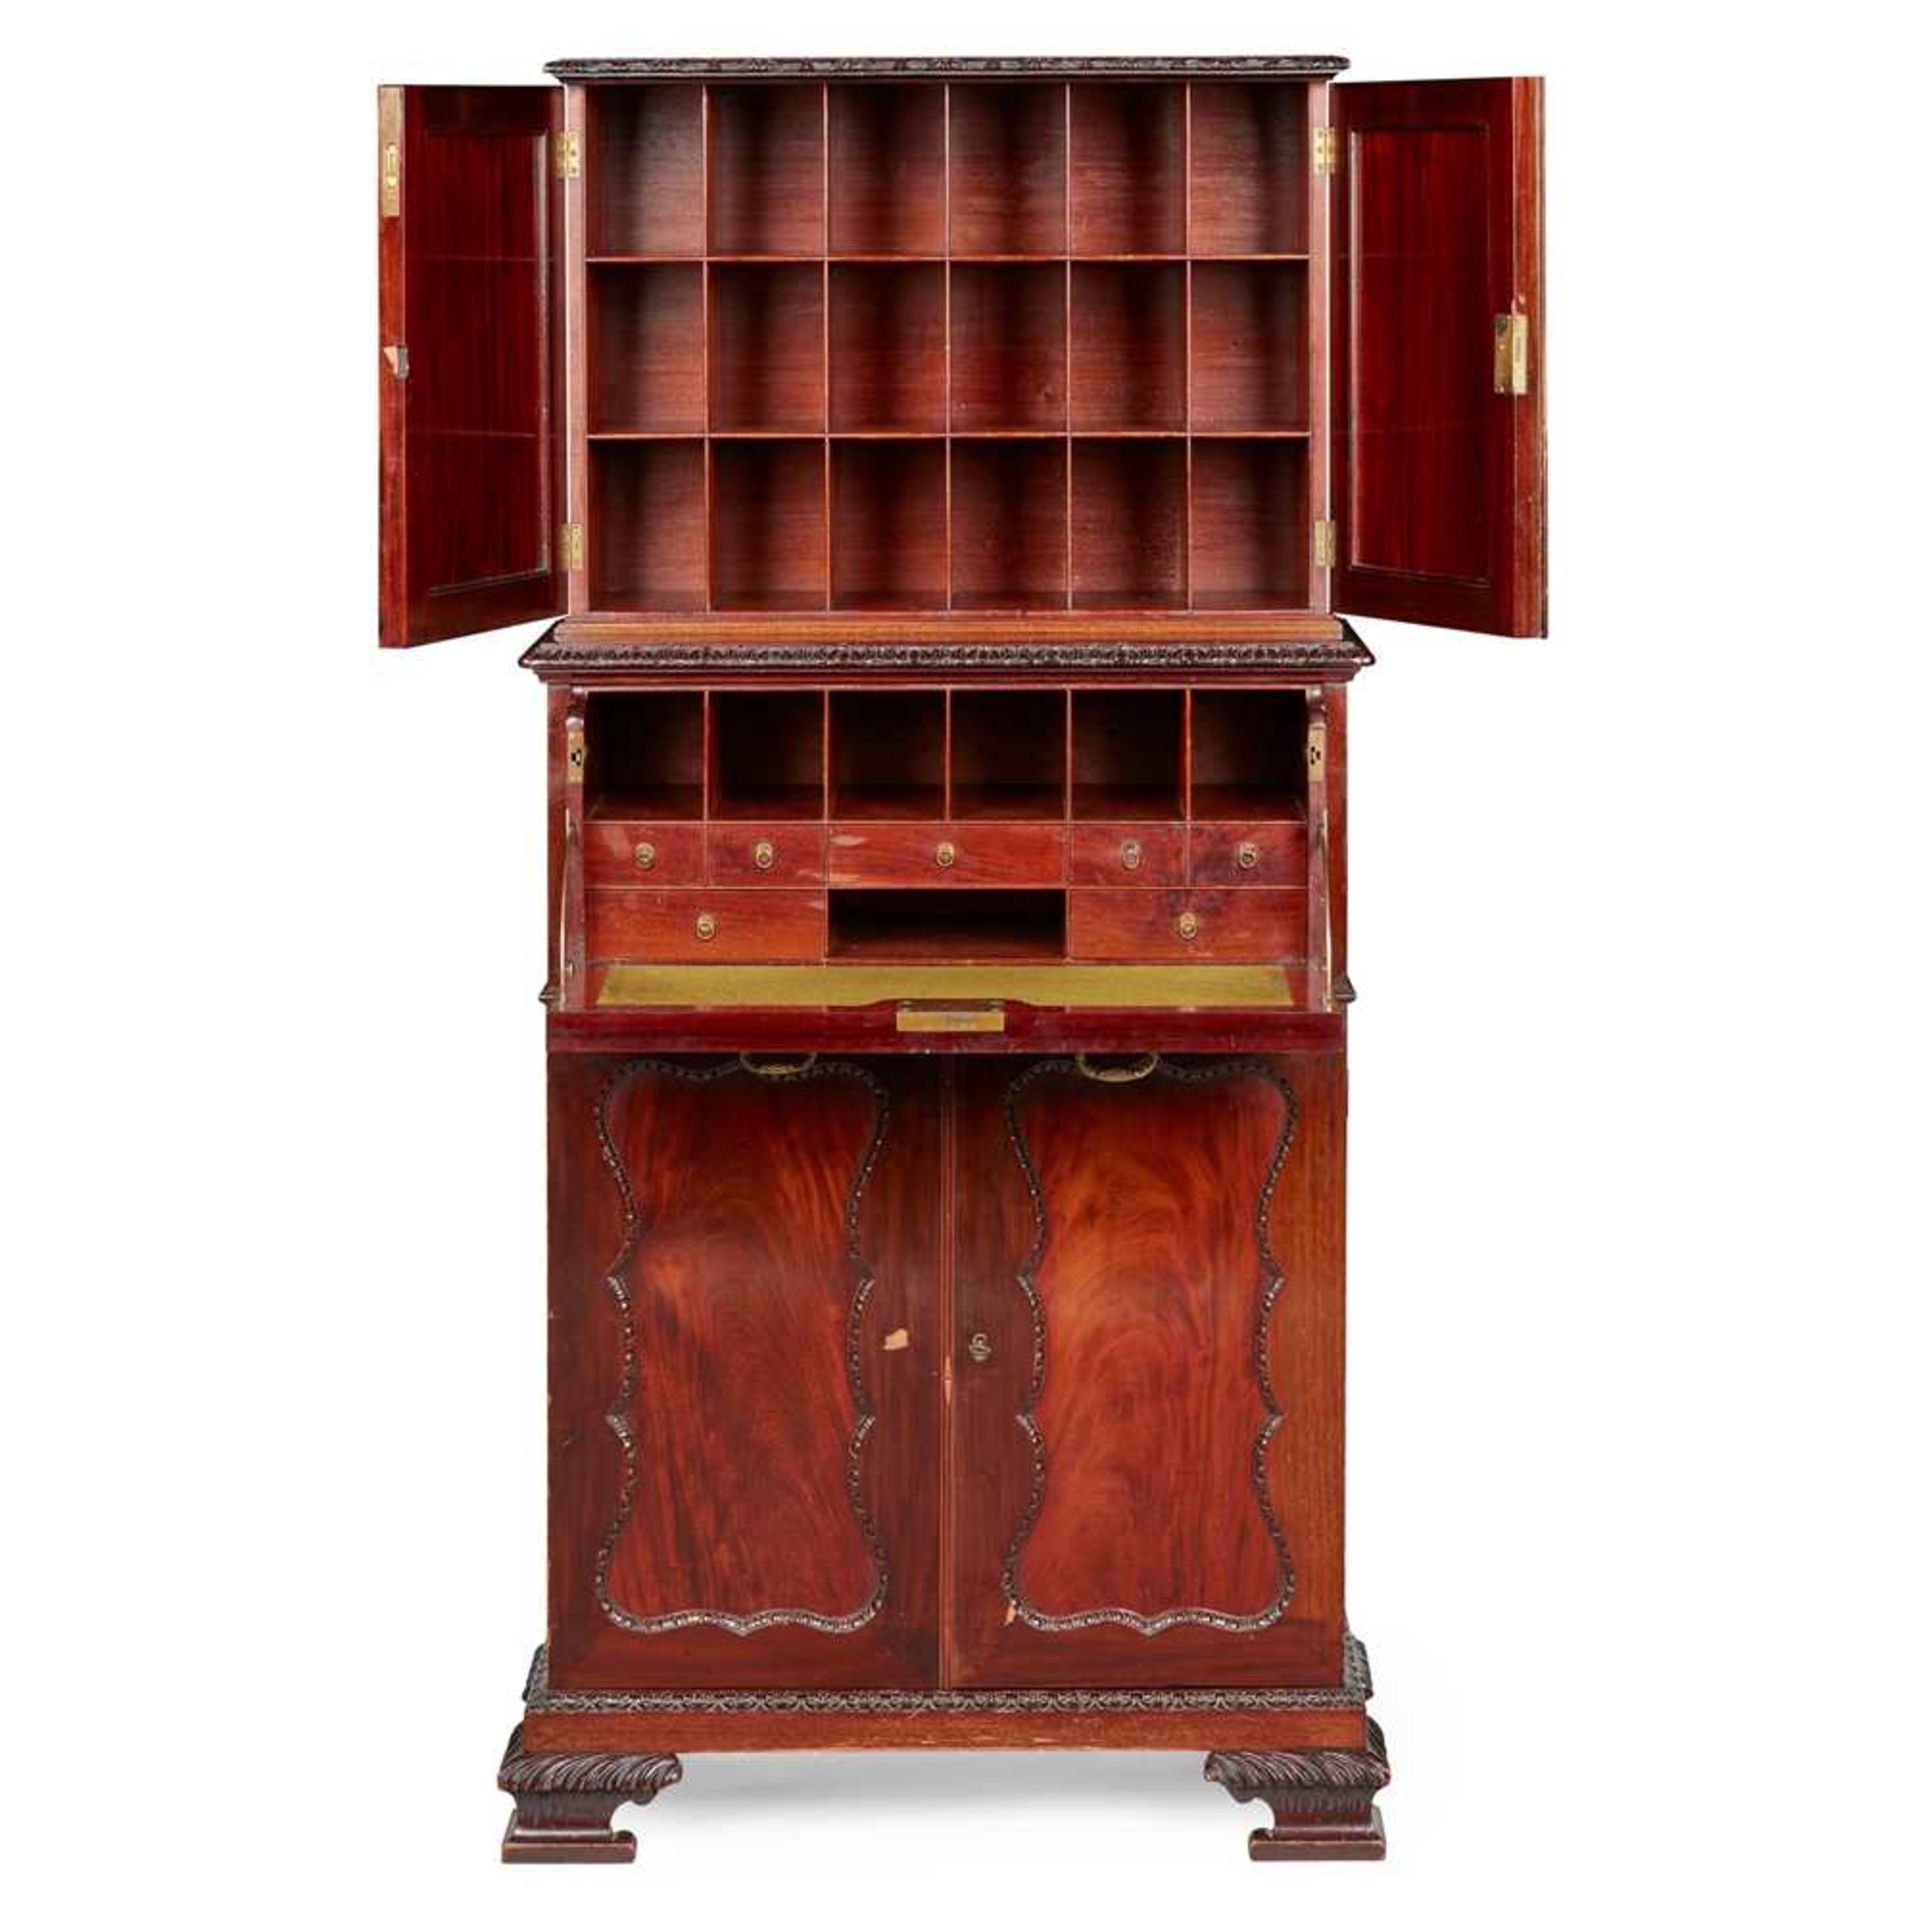 CHIPPENDALE STYLE MAHOGANY BUREAU CABINET LATE 19TH/ EARLY 20TH CENTURY - Image 3 of 4